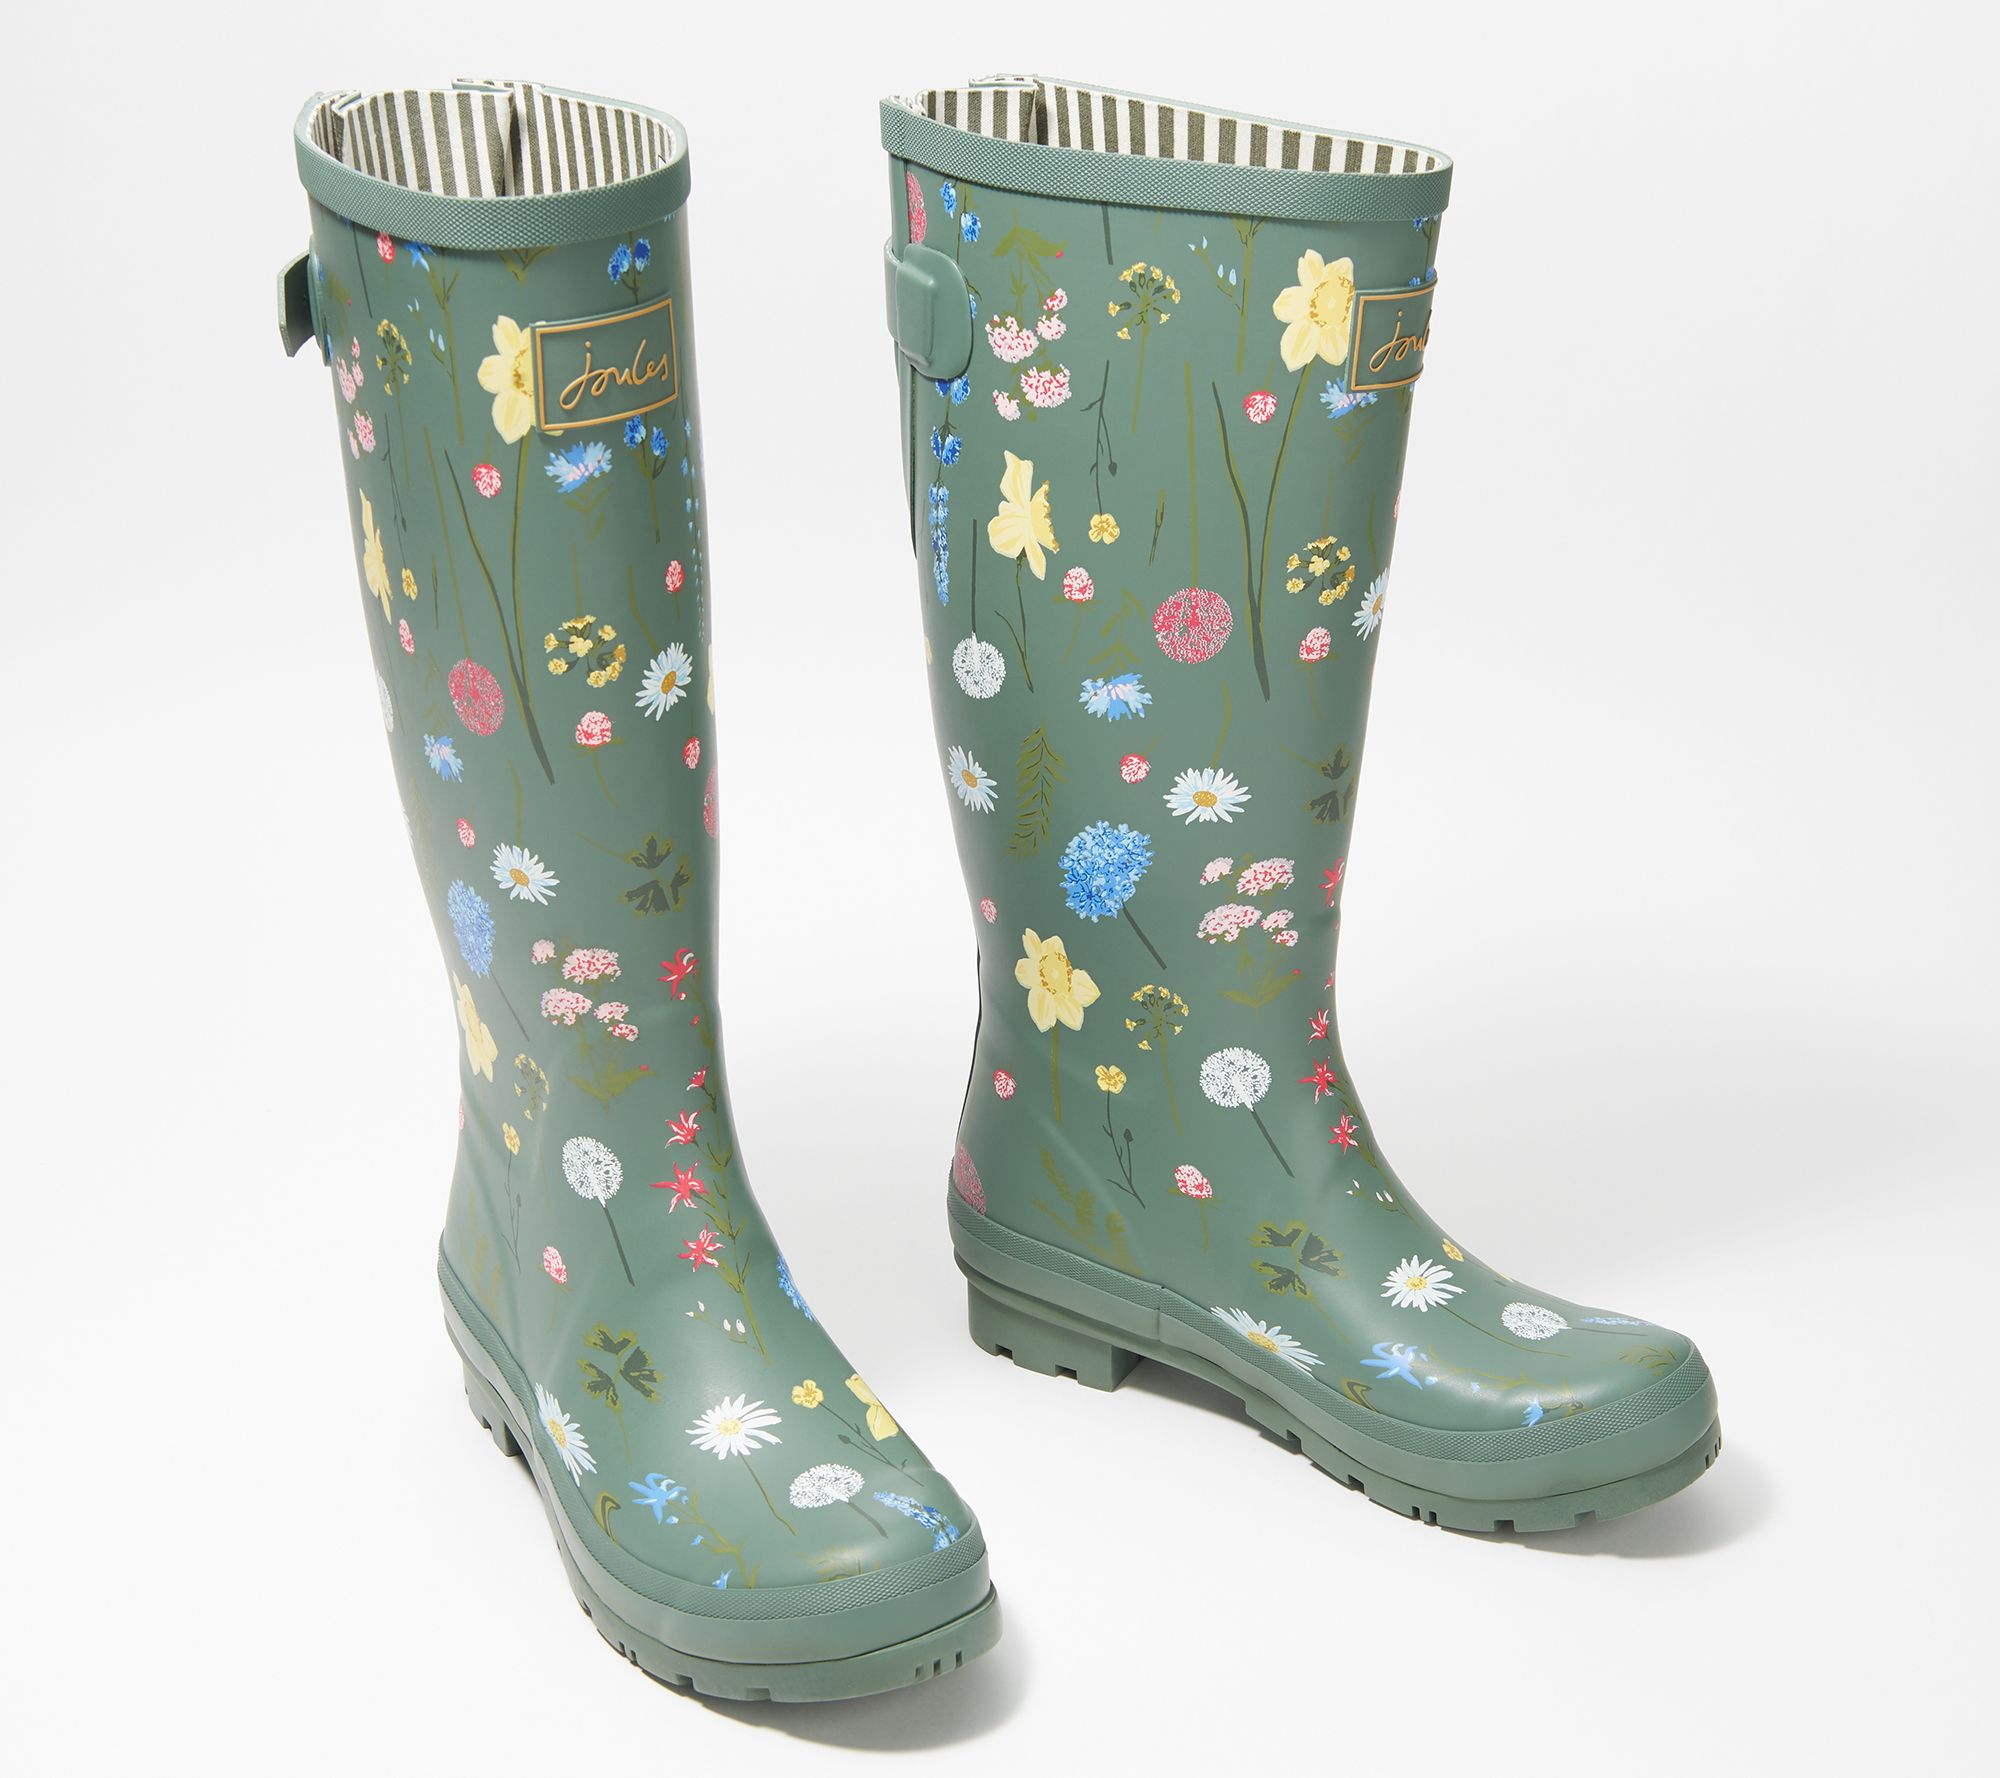 Joules Printed Tall Rain Boots - Welly 